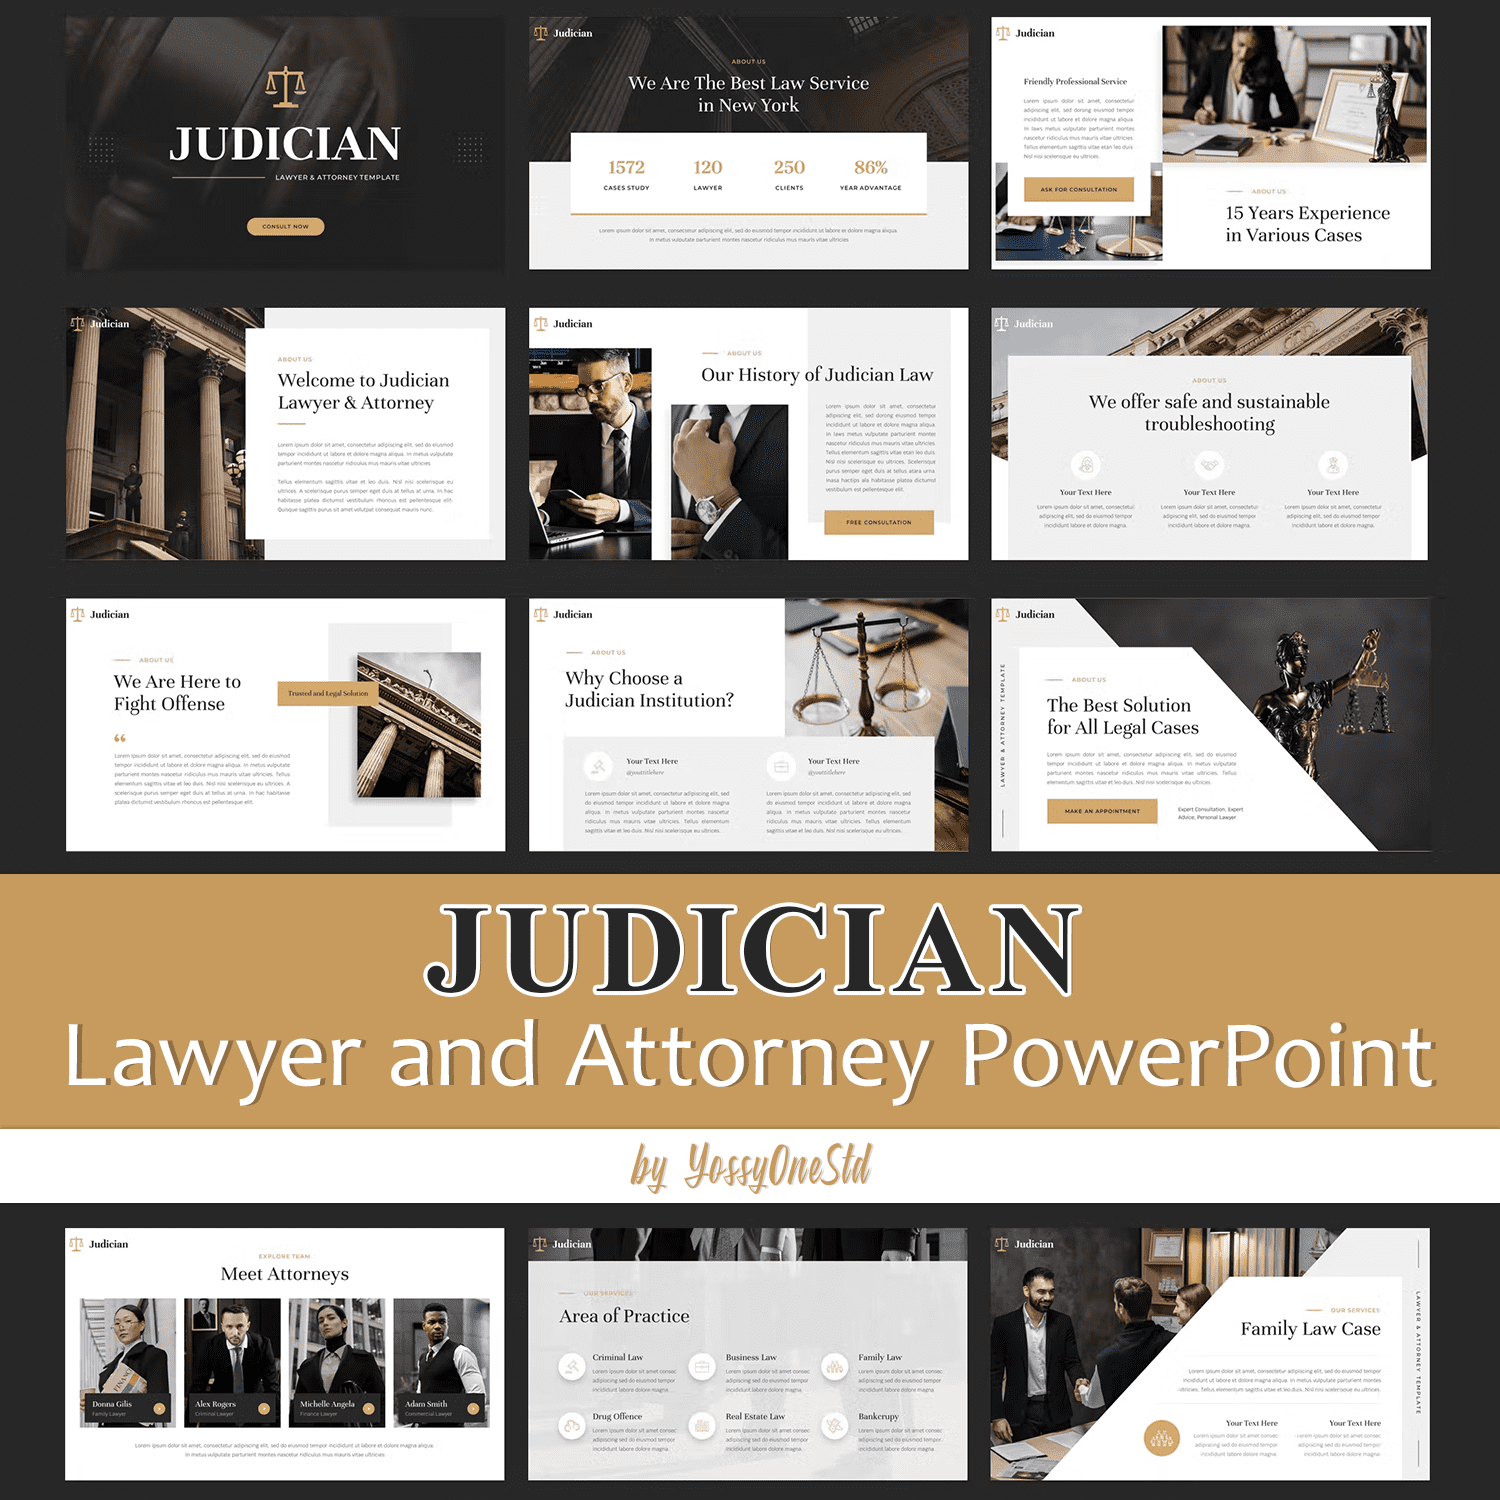 Preview judician lawyer and attorney powerpoint.